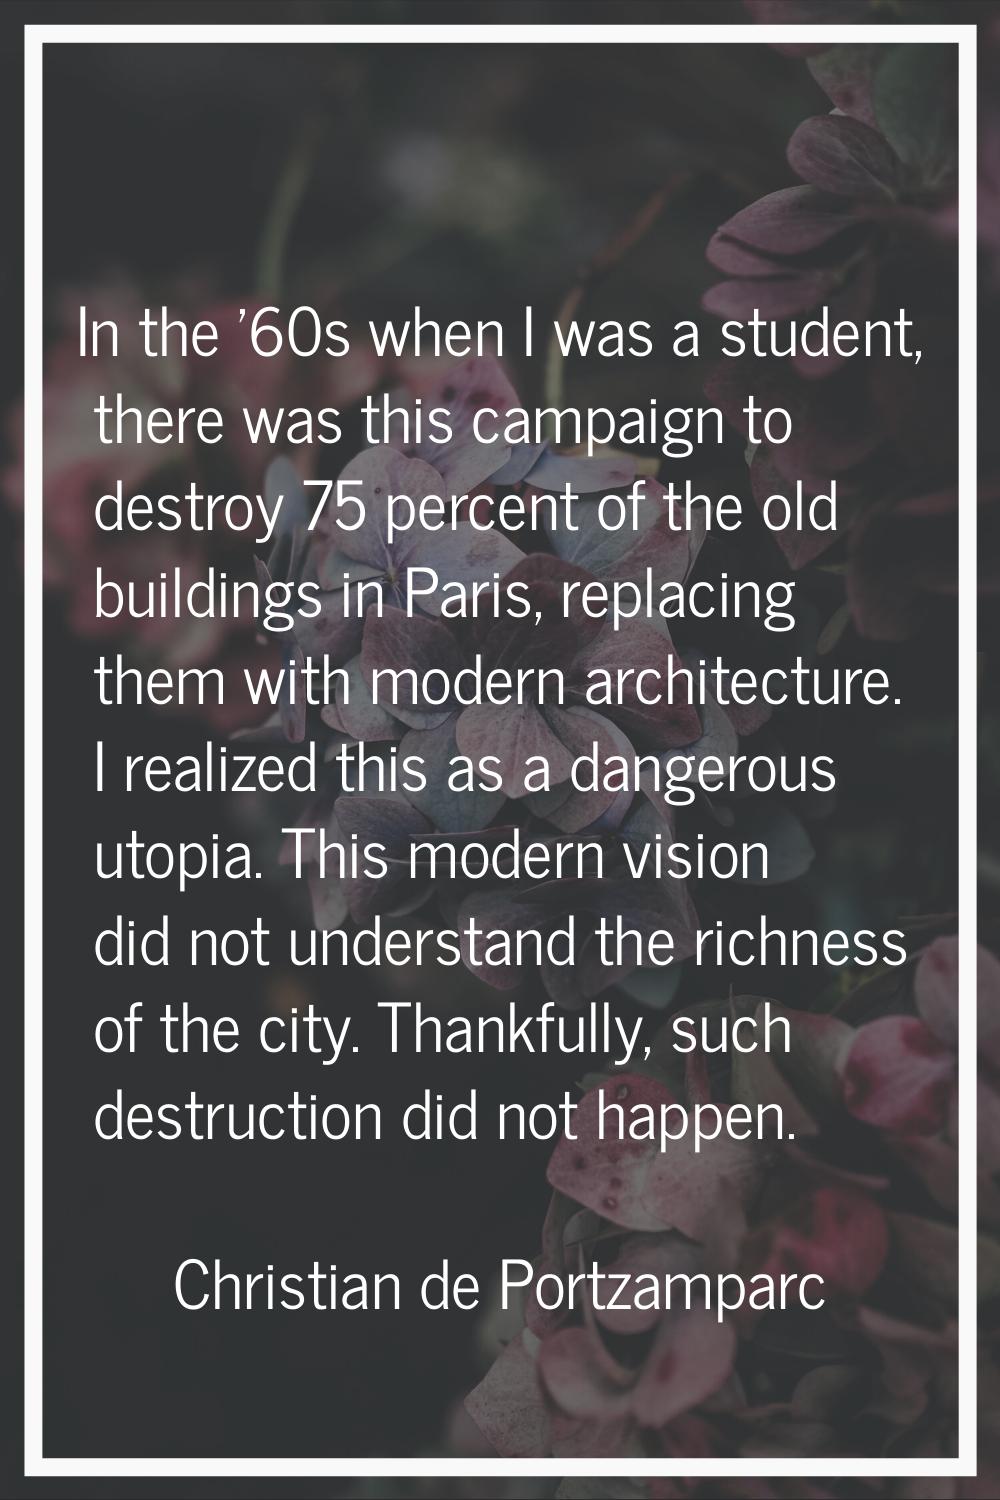 In the '60s when I was a student, there was this campaign to destroy 75 percent of the old building